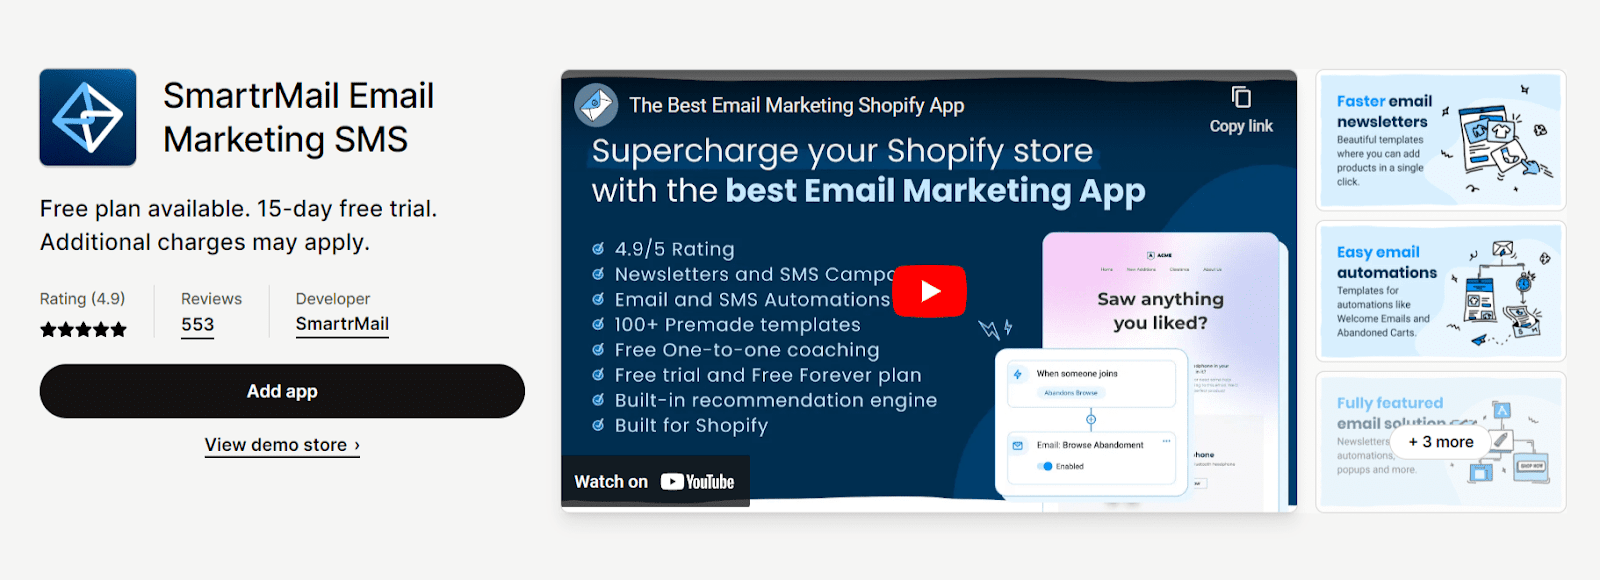 marketing automation for shopify - smartrmail